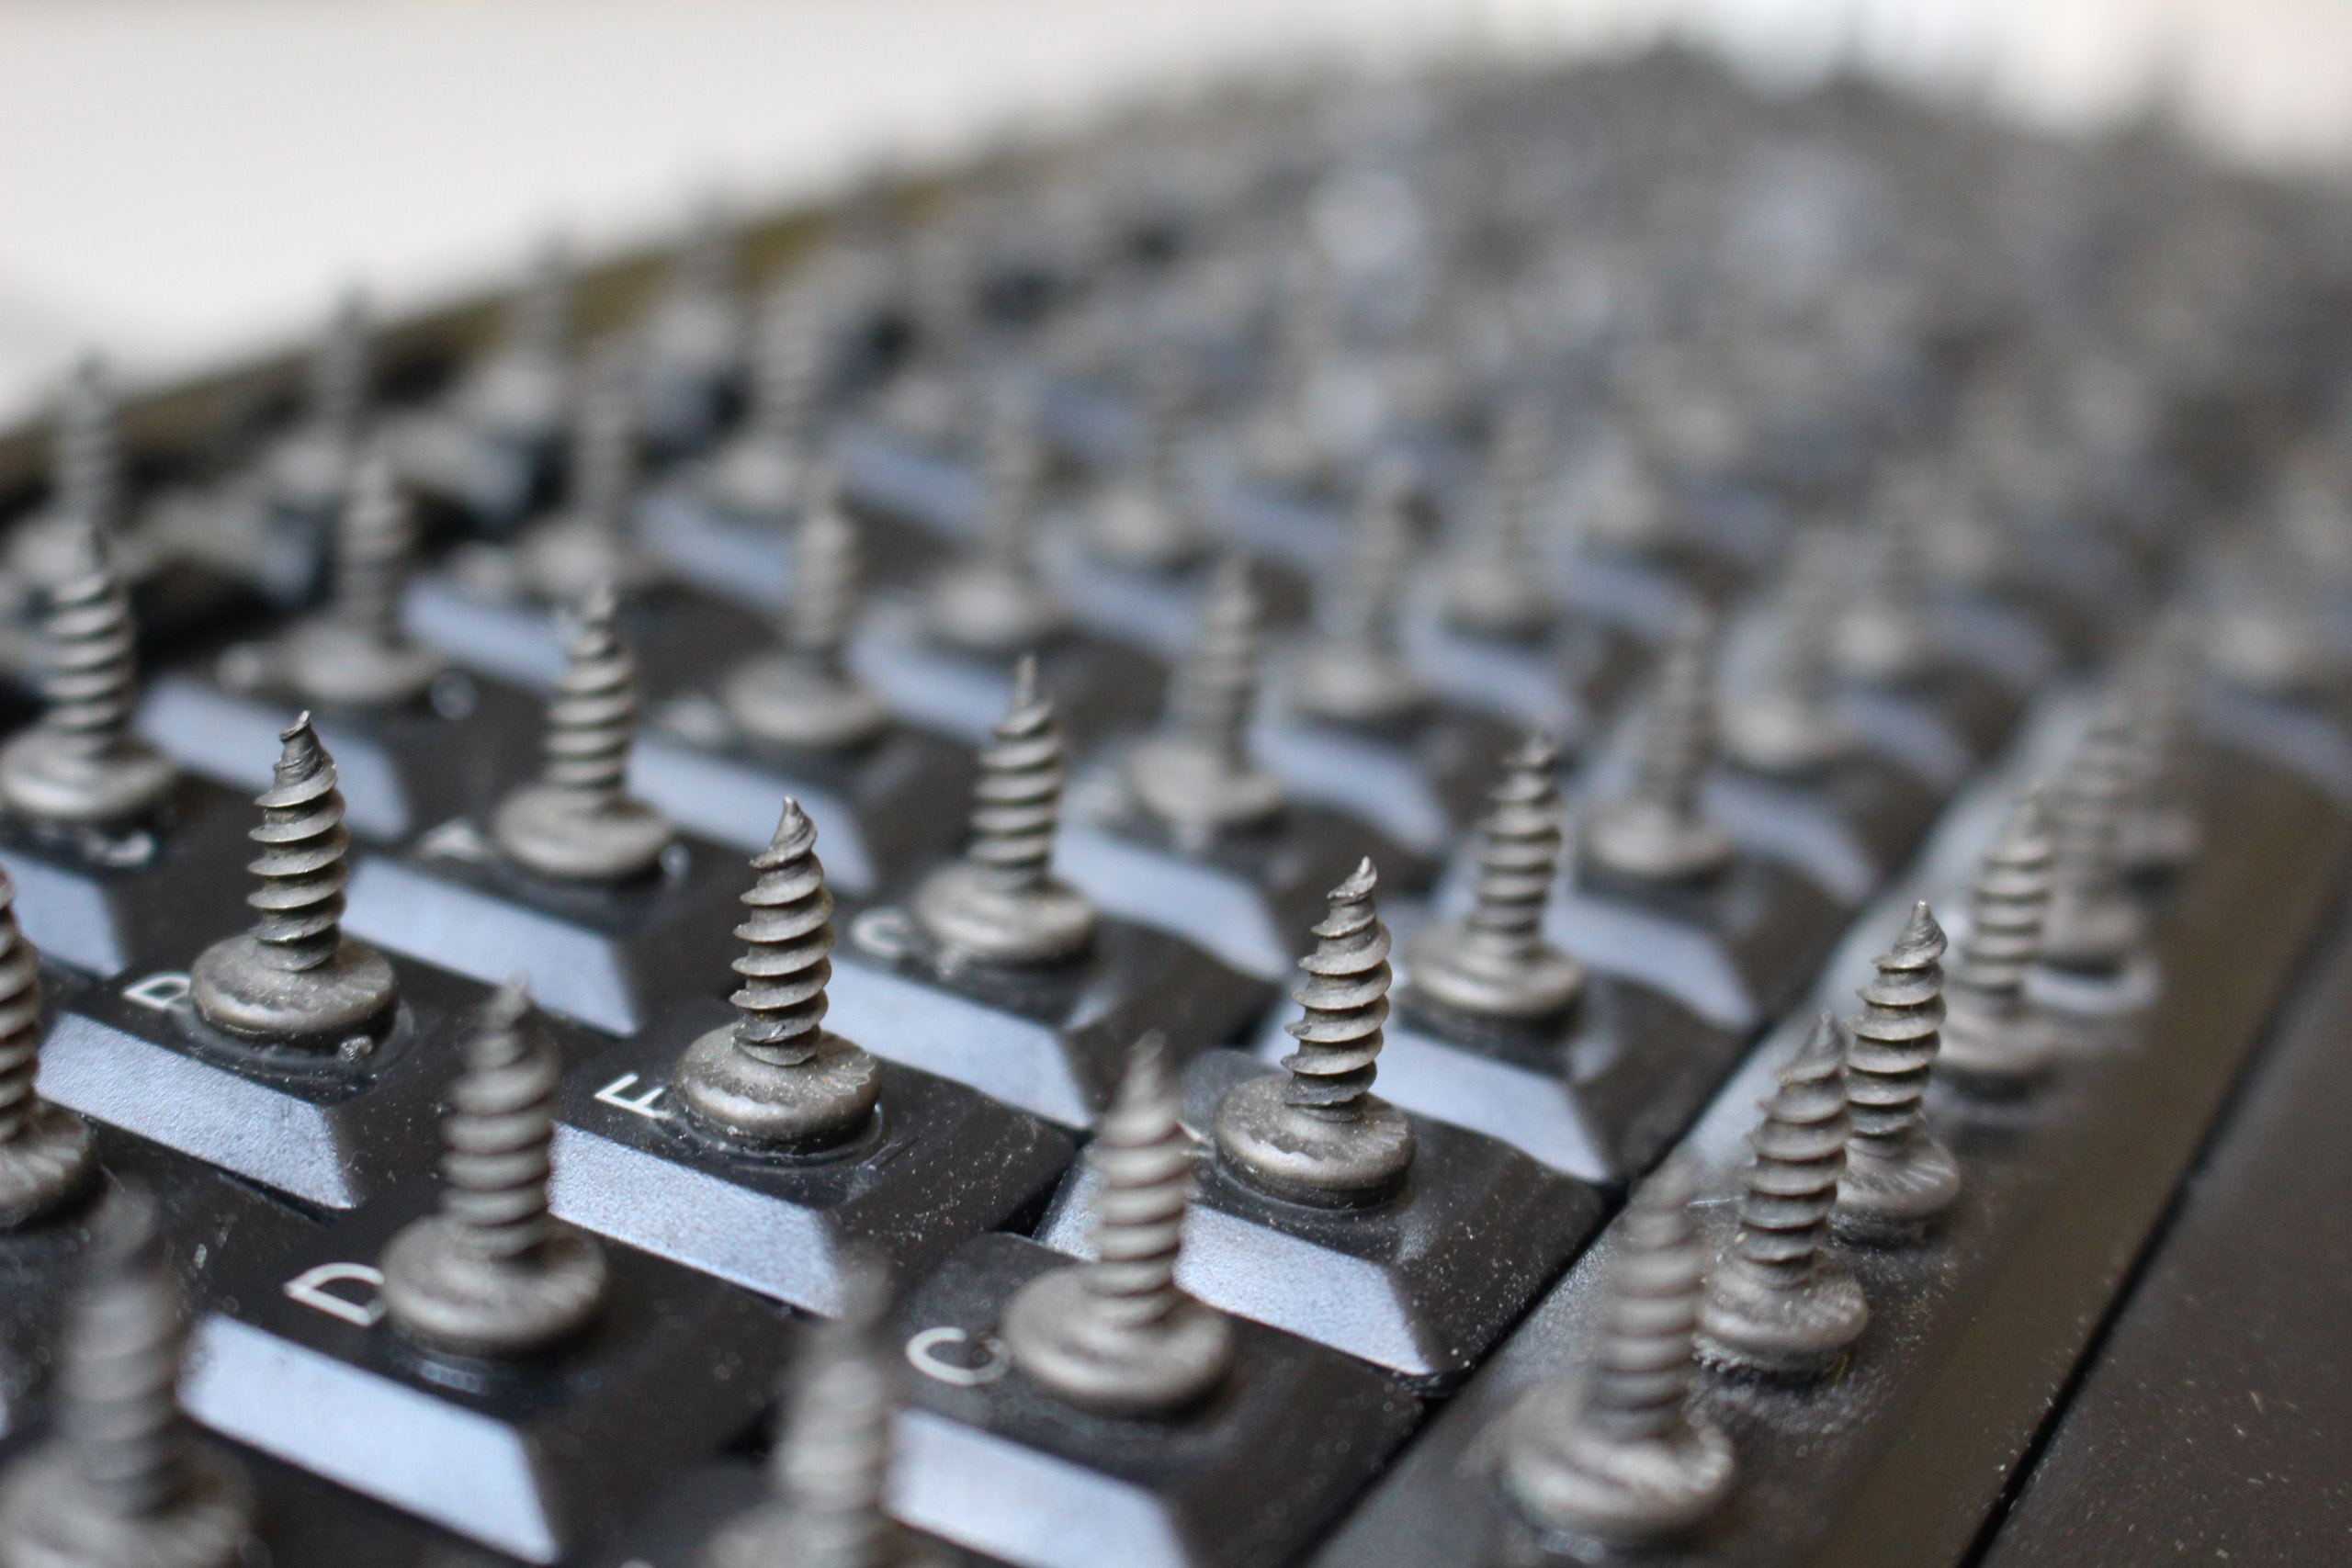 Close up of <i>Reticence</i>, version one. A keyboard with short screws glued to each key. Picture taken by Steven LeMieux